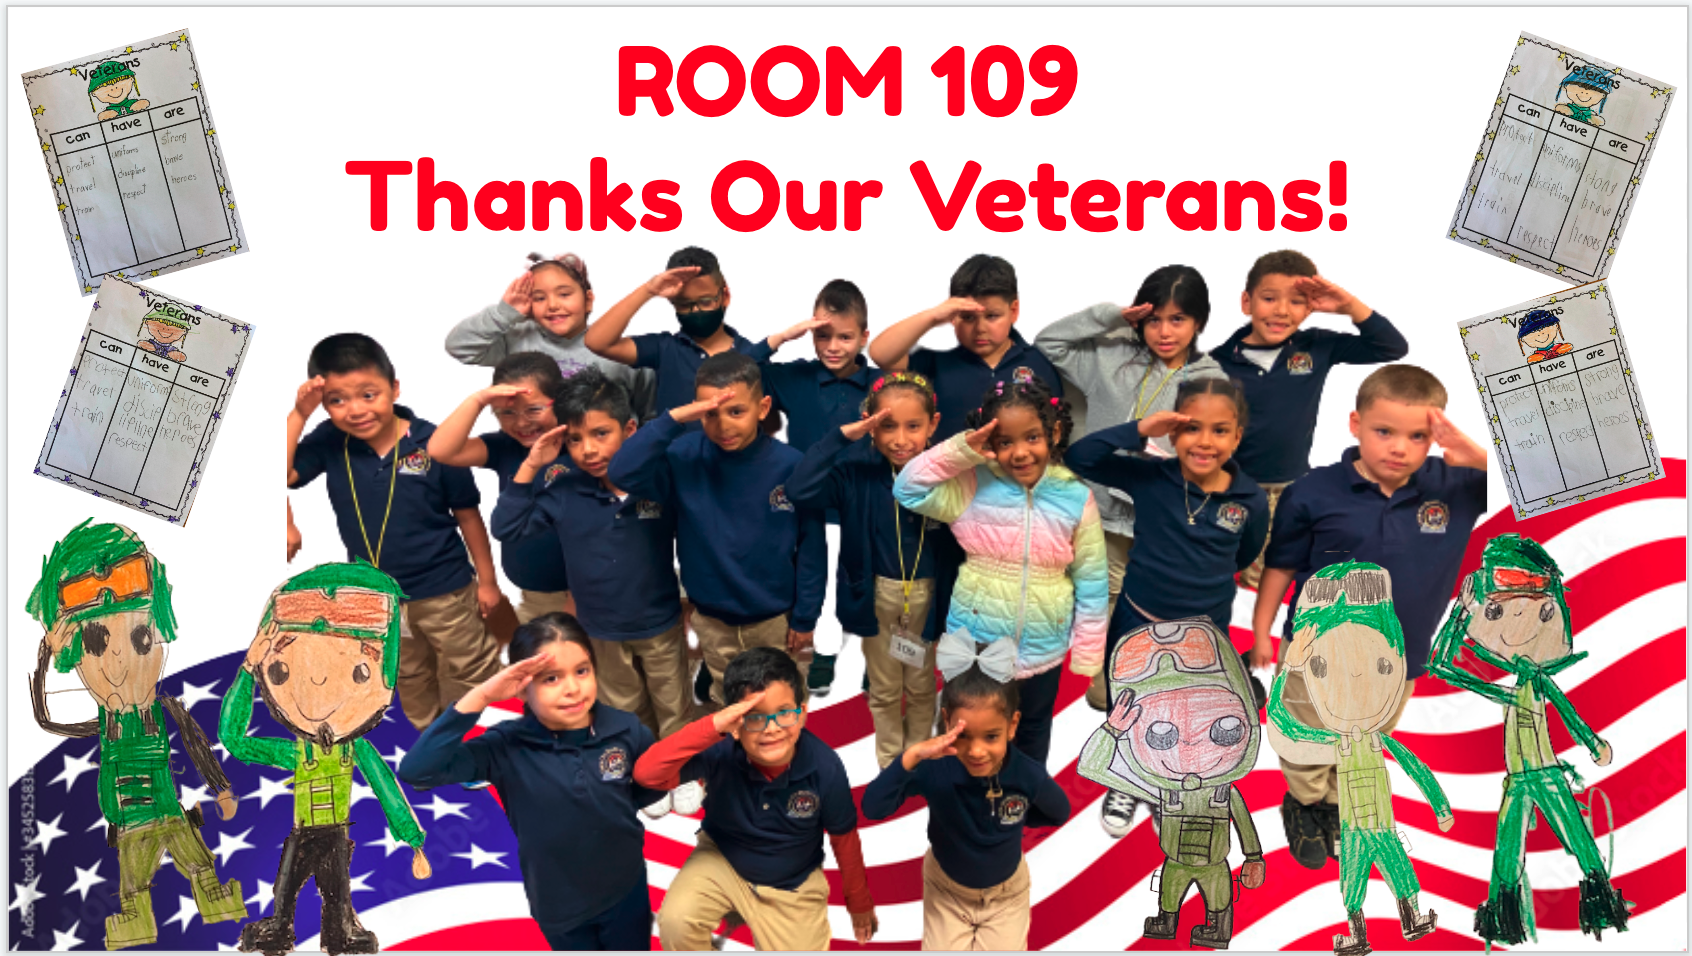 Room 109 honors our veterans